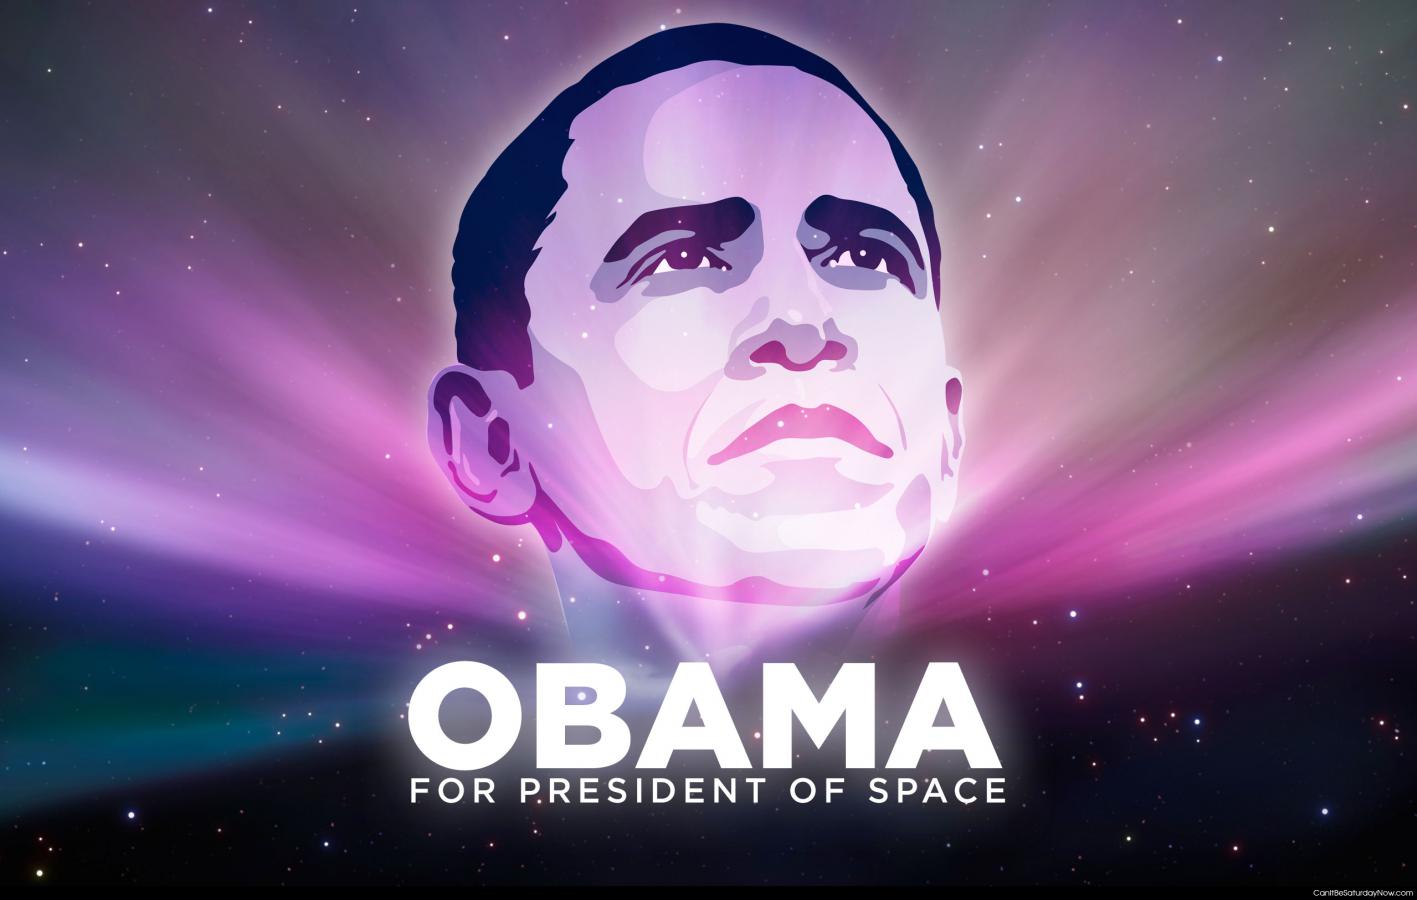 Space president - Obama for president of space